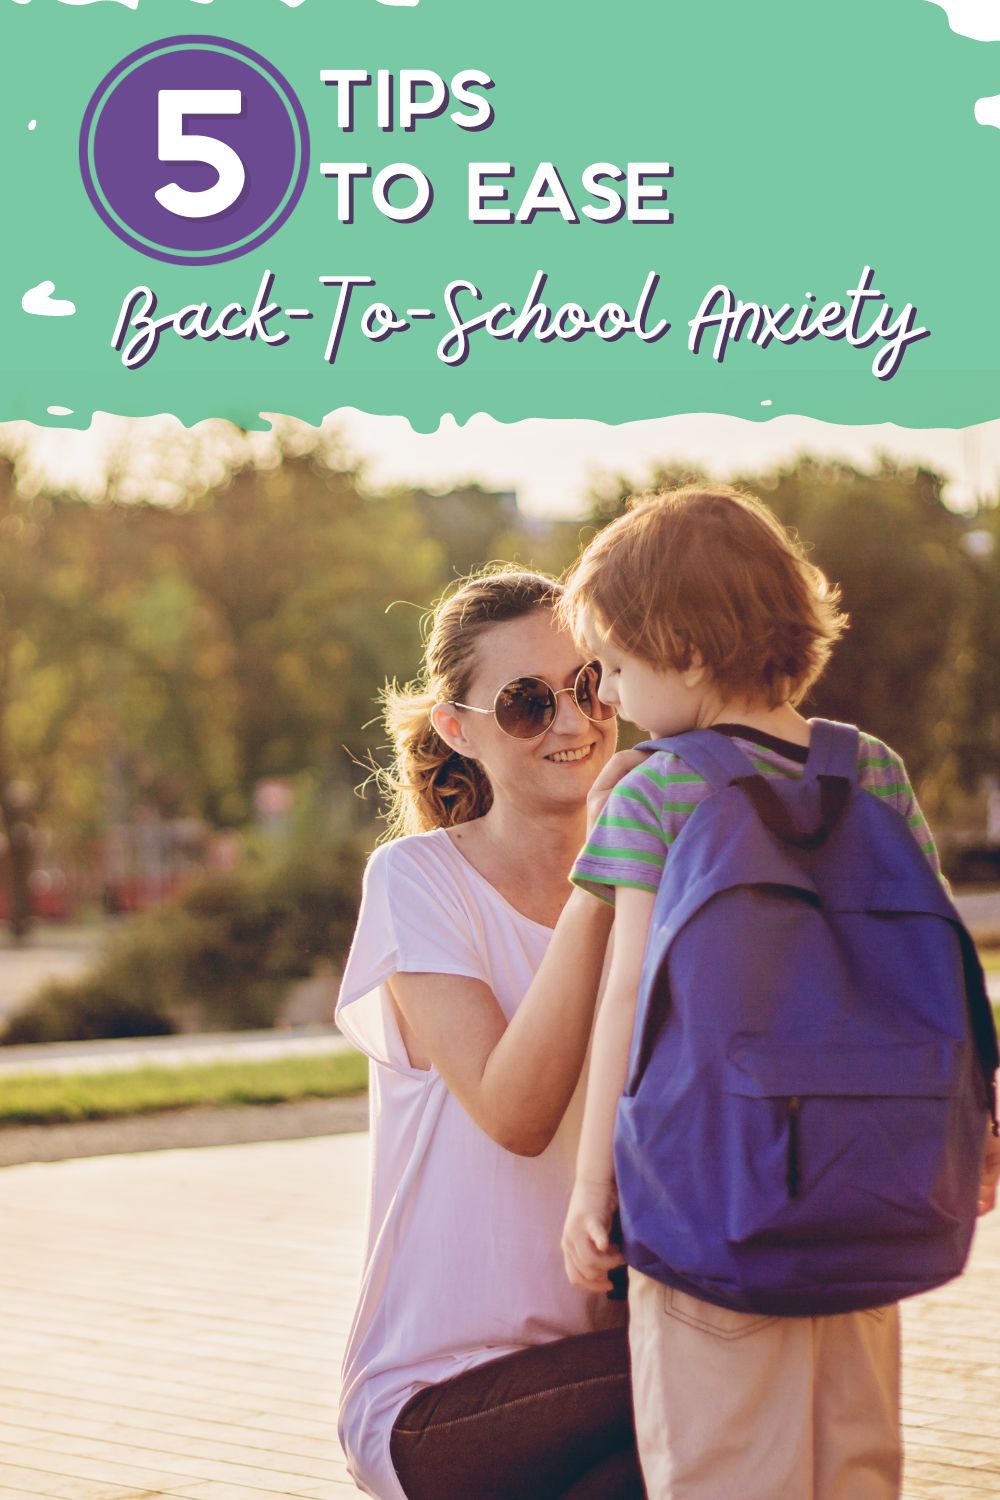 Here are some tips on how to minimize back-to-school anxiety and help your kids return to school feeling a bit more confident.